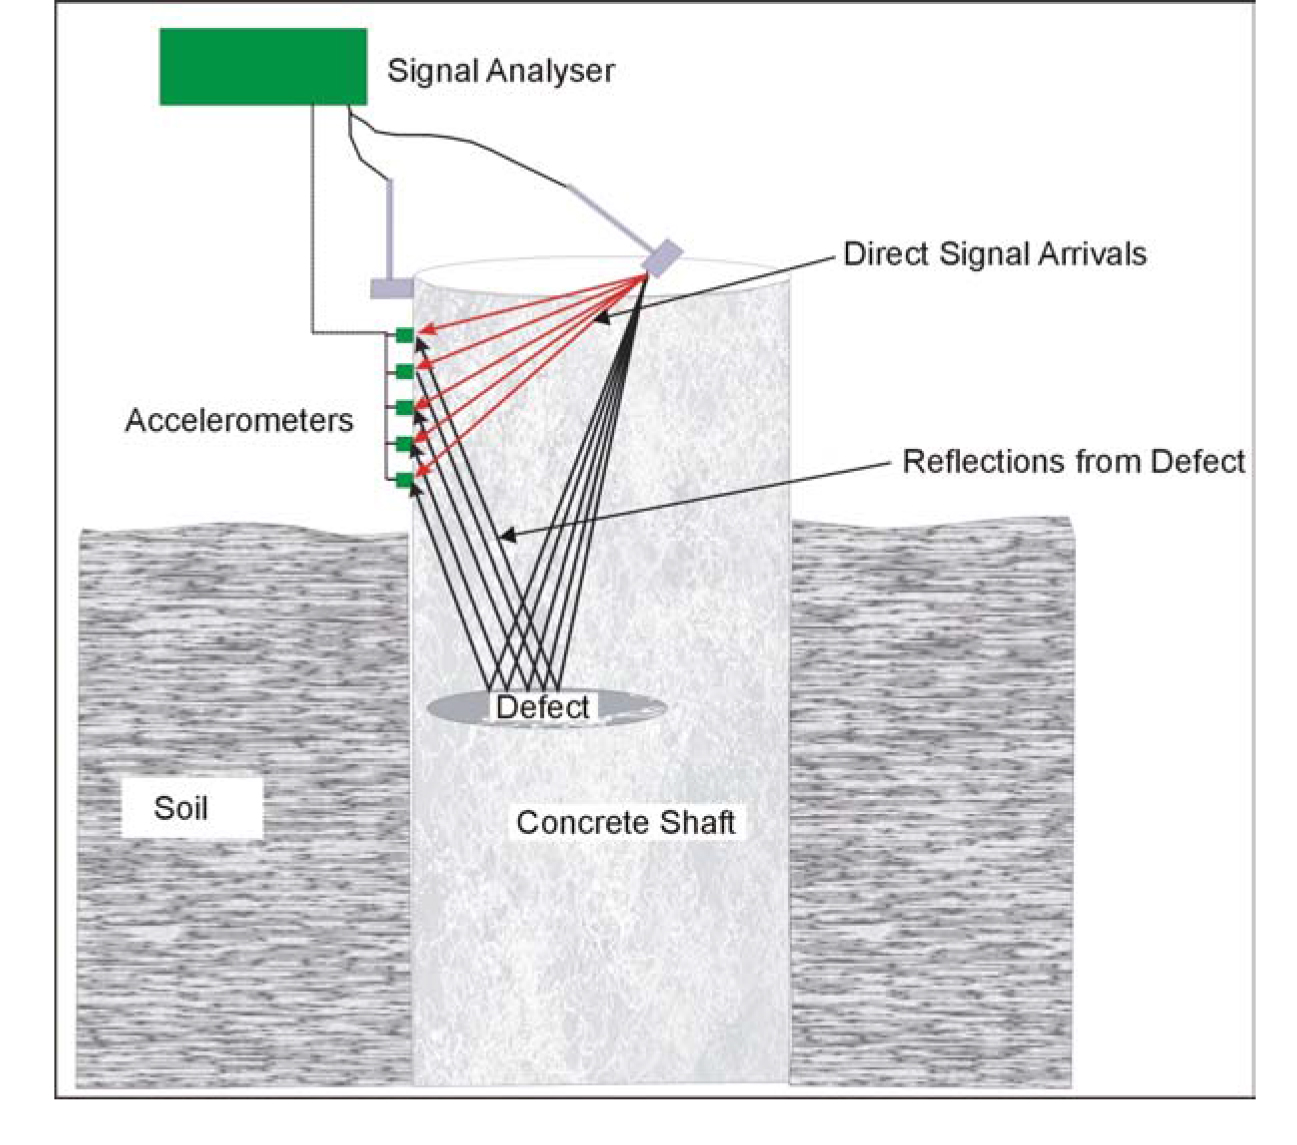 Ultraseismic test method showing the vertical profiling test geometry.